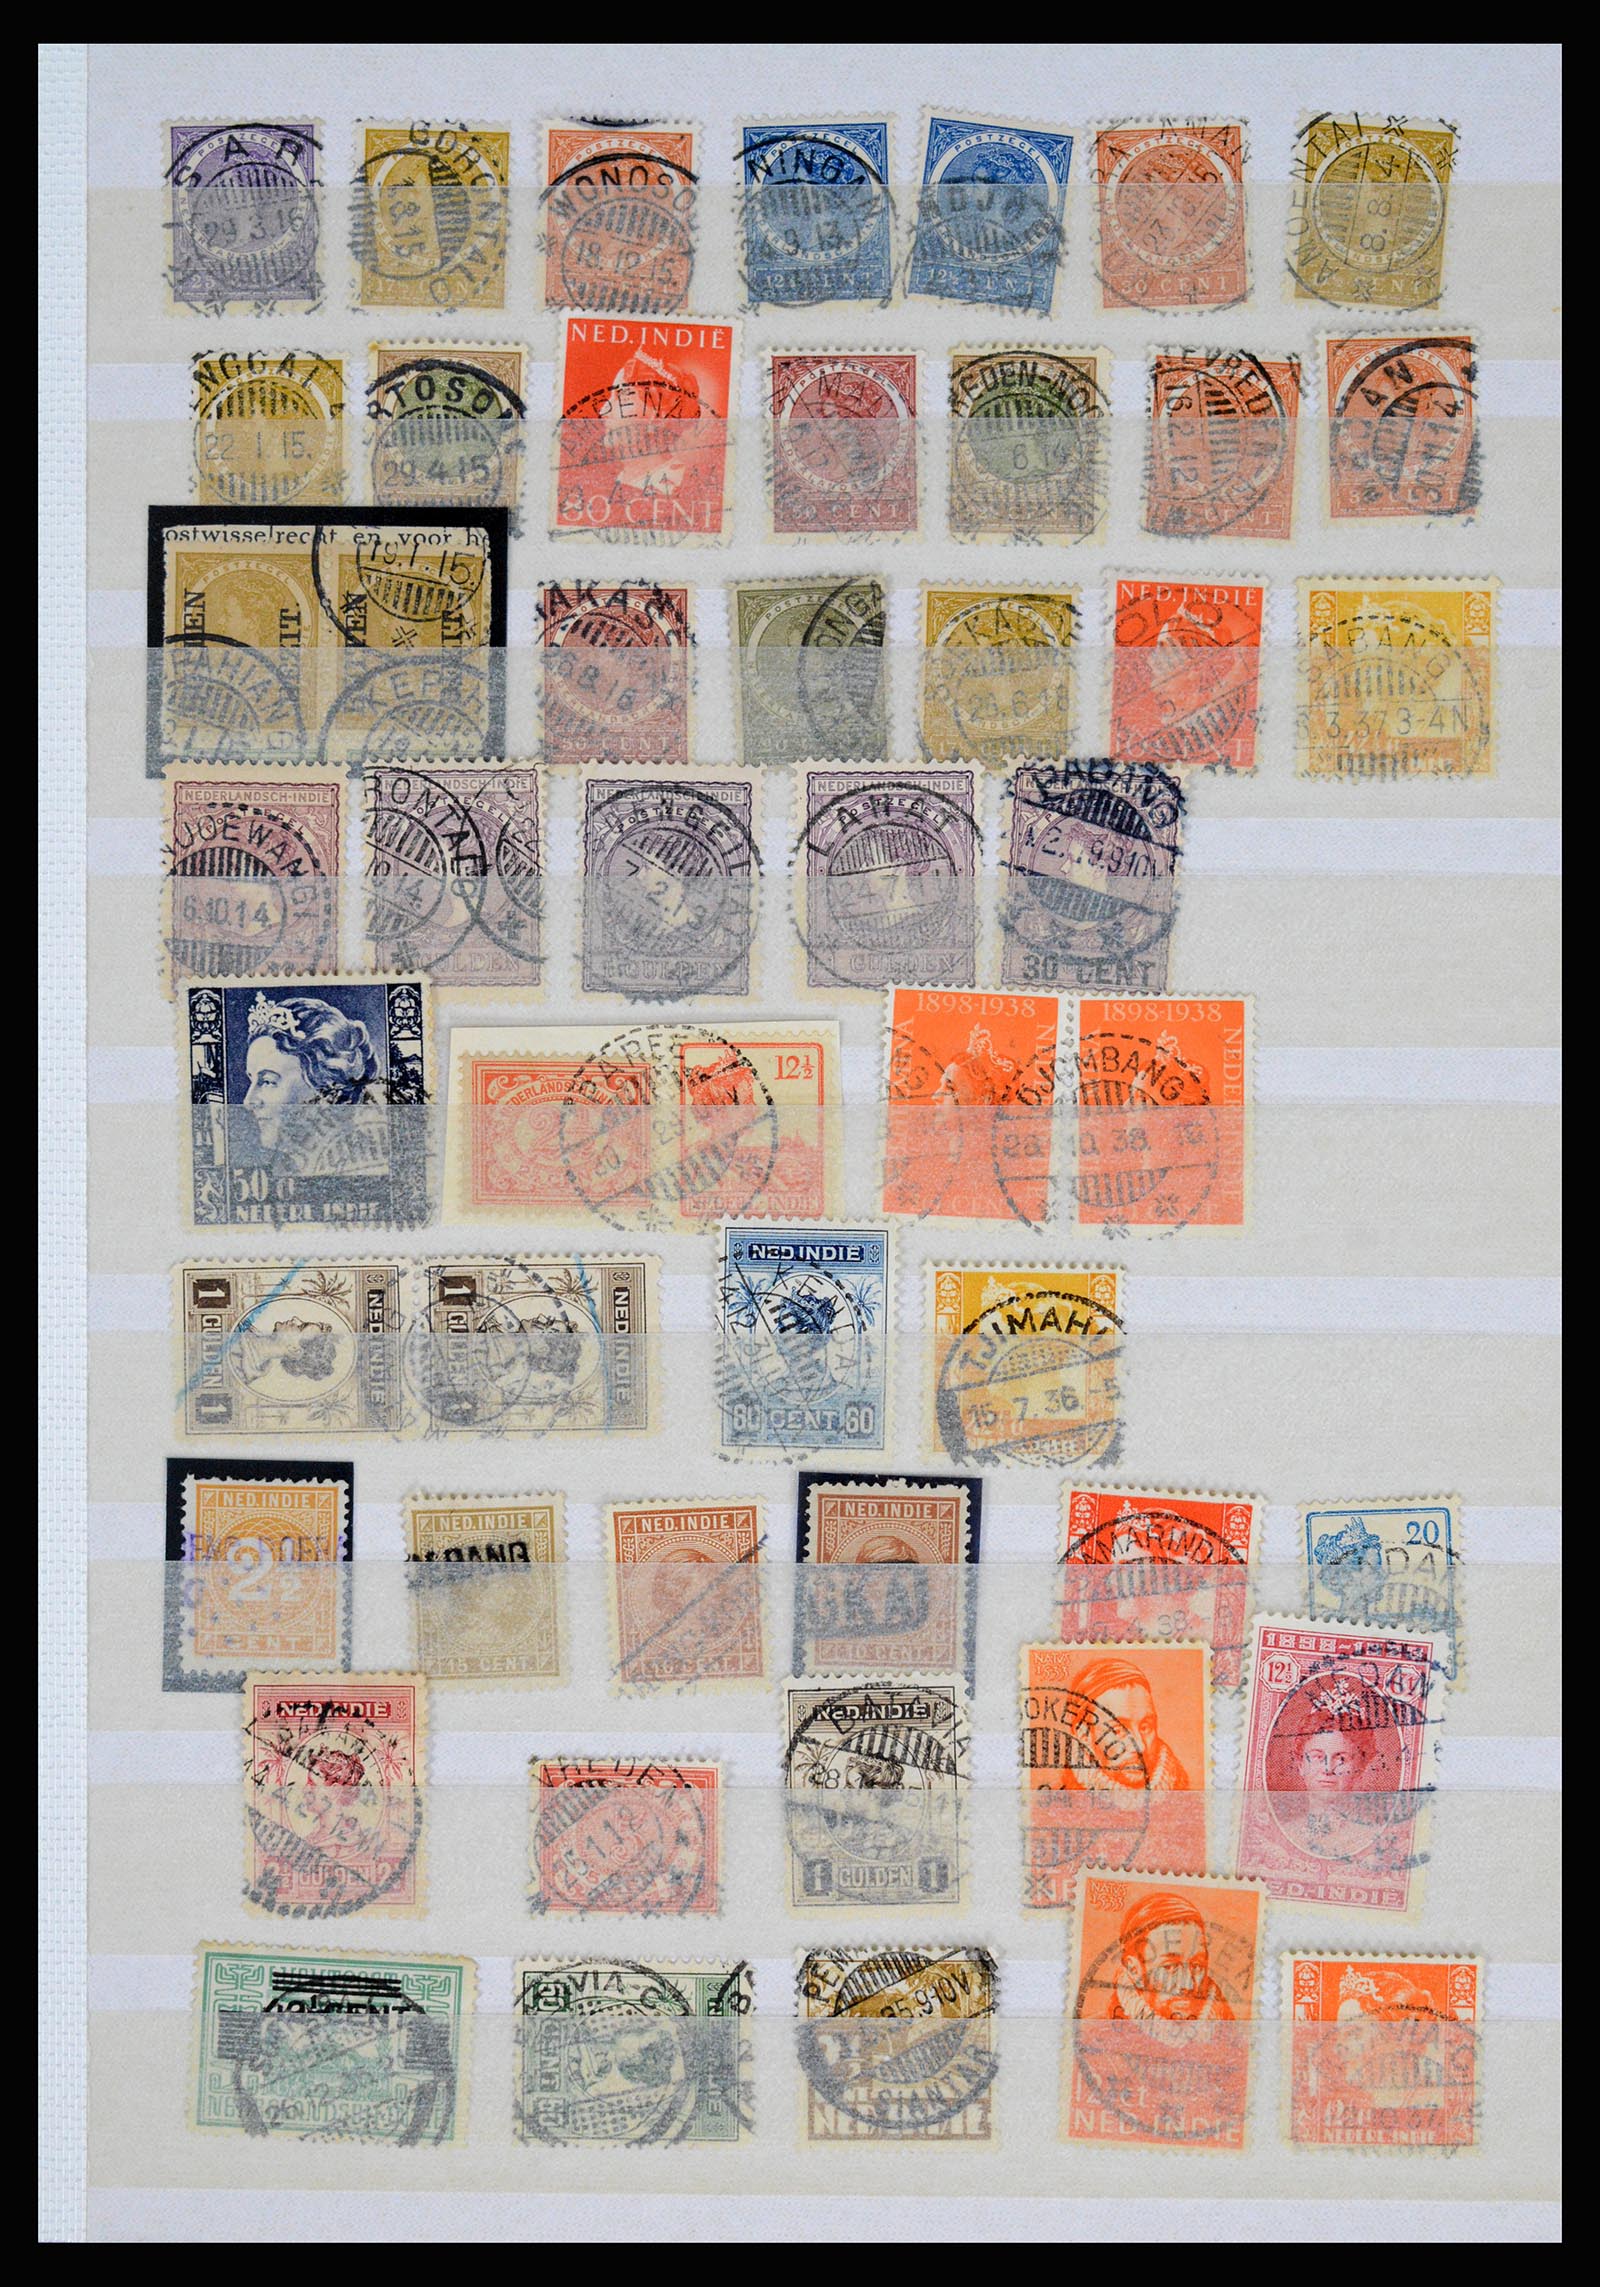 36839 107 - Stamp collection 36839 Dutch east Indies square cancels.